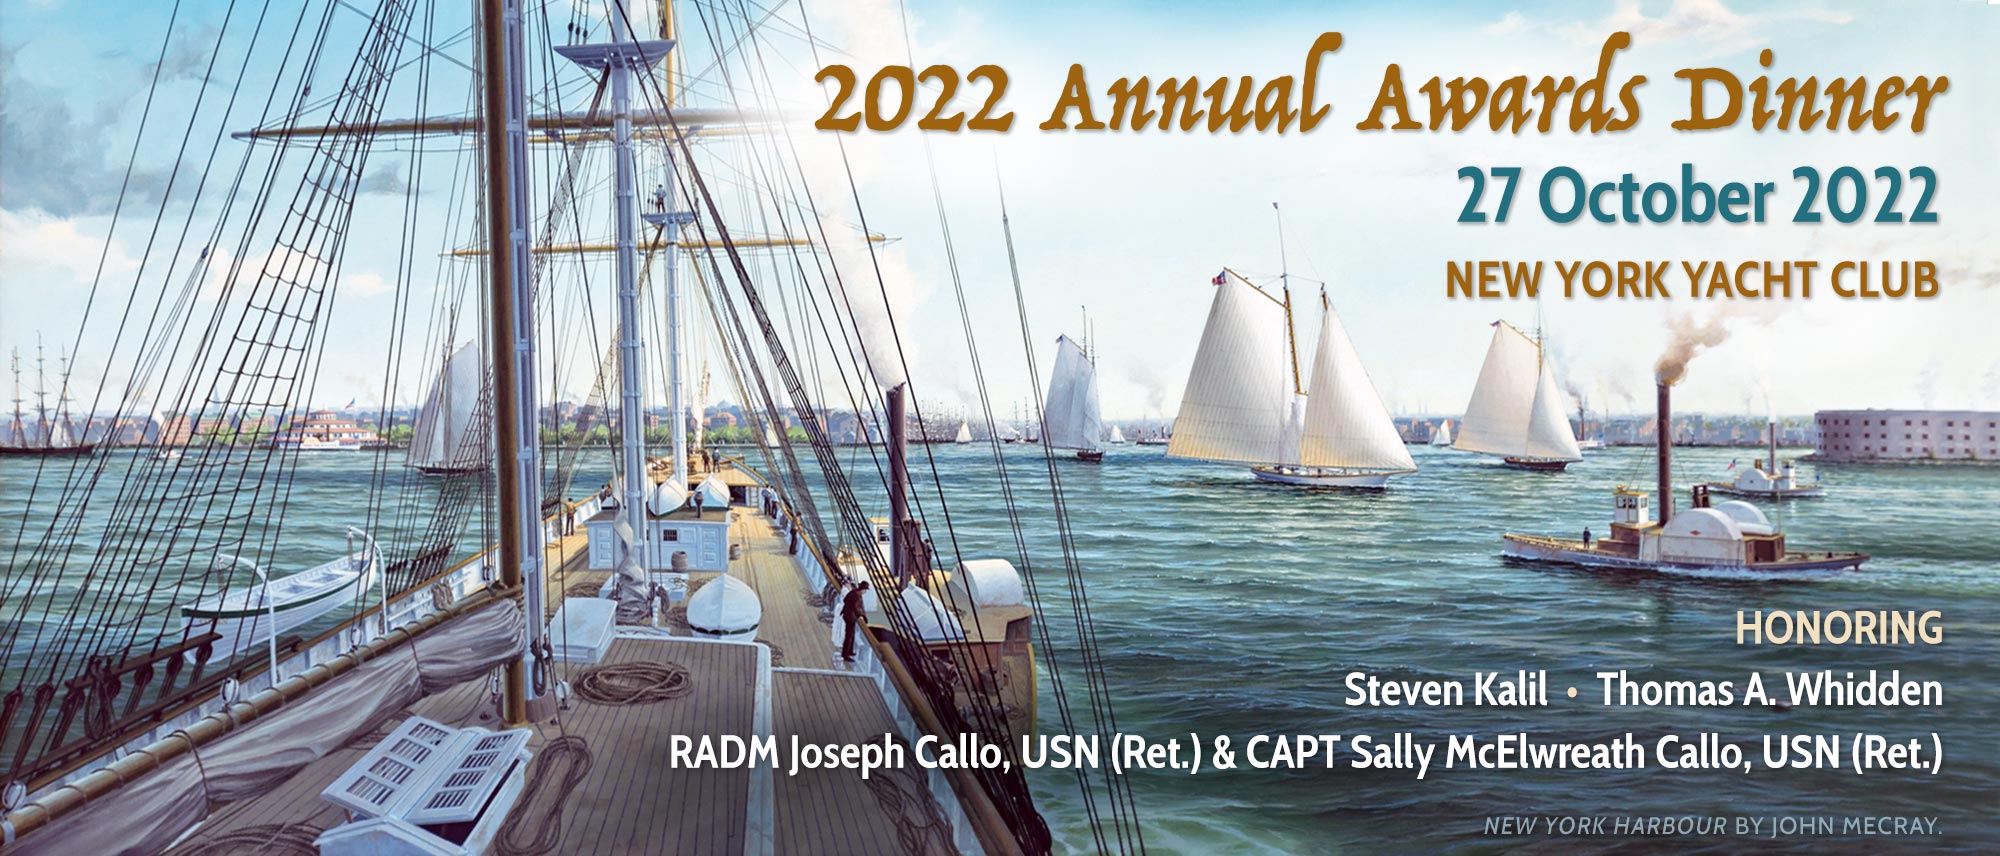 2022 Annual Awards Dinner at the New York Yacht Club 27 October